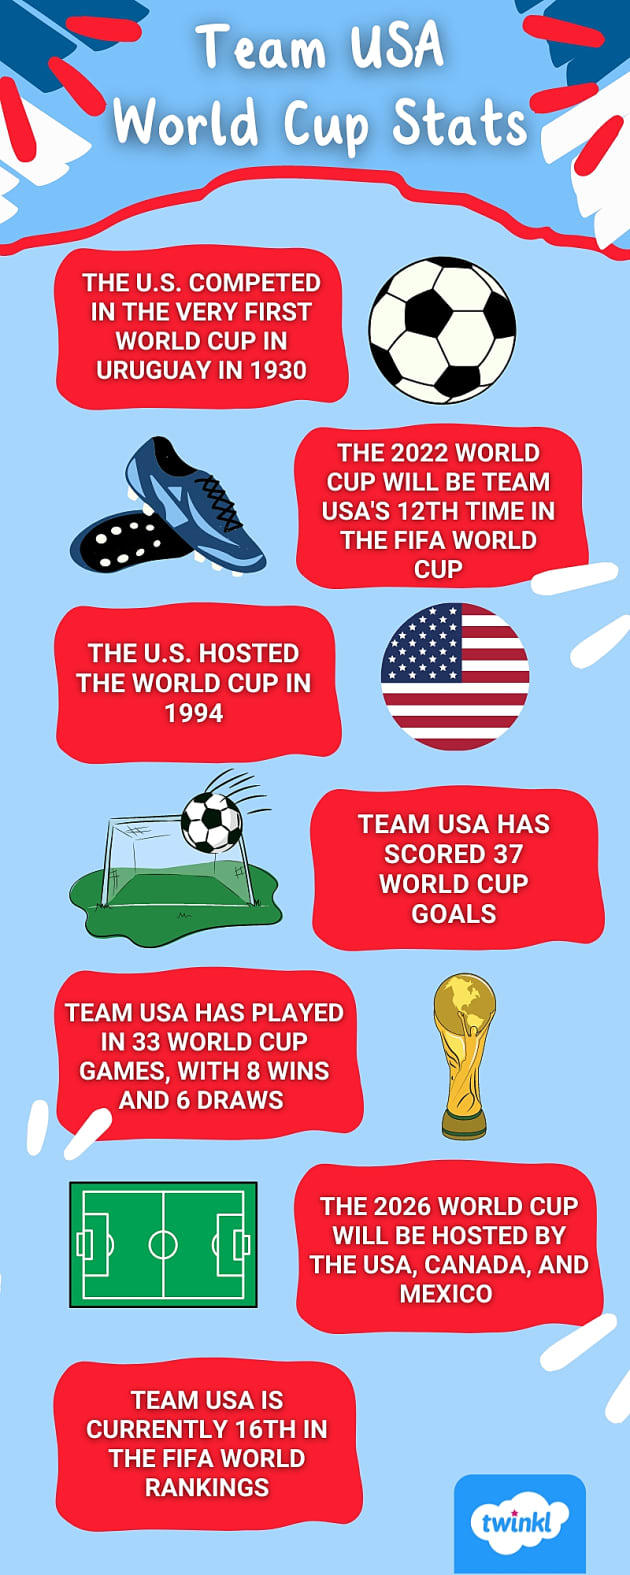 World Cup Activities and Resources for Kids